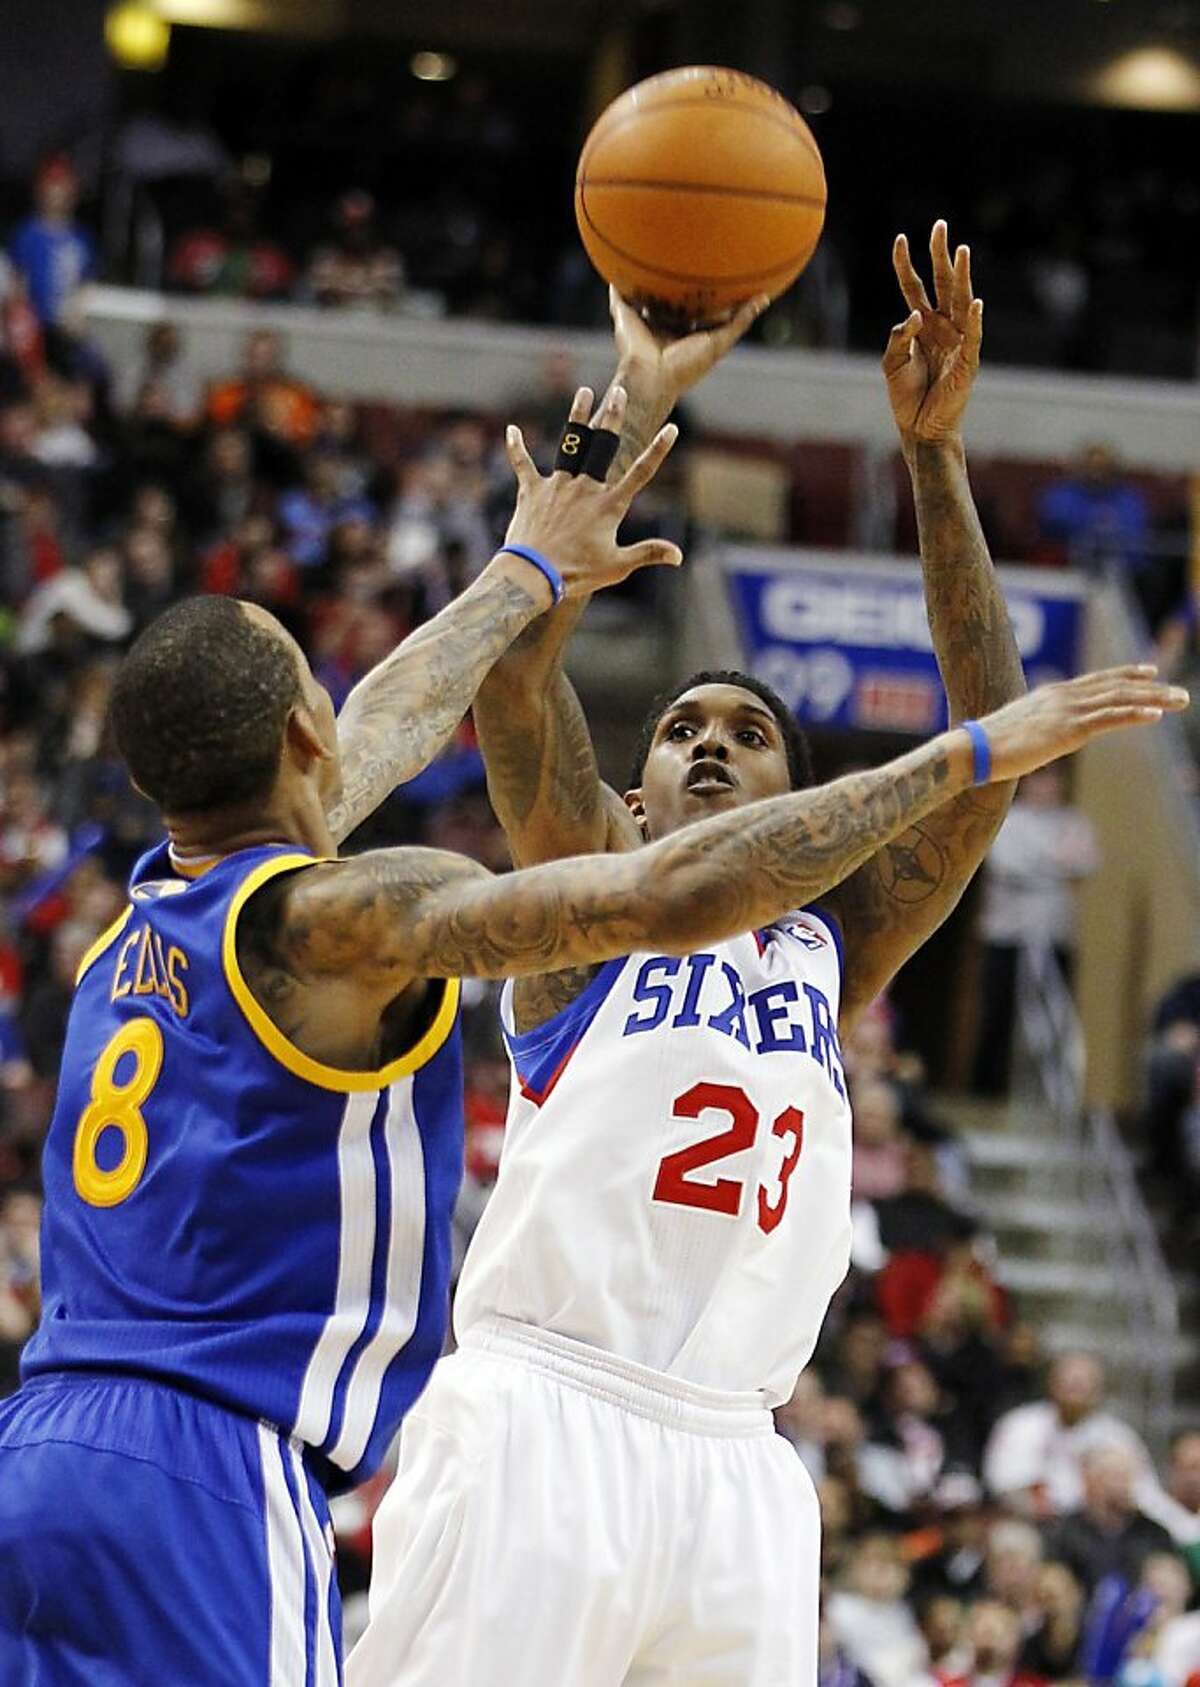 Golden State Warriors guard Monta Ellis (8) defends as Philadelphia 76ers guard Lou Williams (23) shoots in the second half of an NBA basketball game, Friday, March 2, 2012, in Philadelphia. Williams led all scorers with 25 points as the 76ers won 105-83. (AP Photo/Alex Brandon)